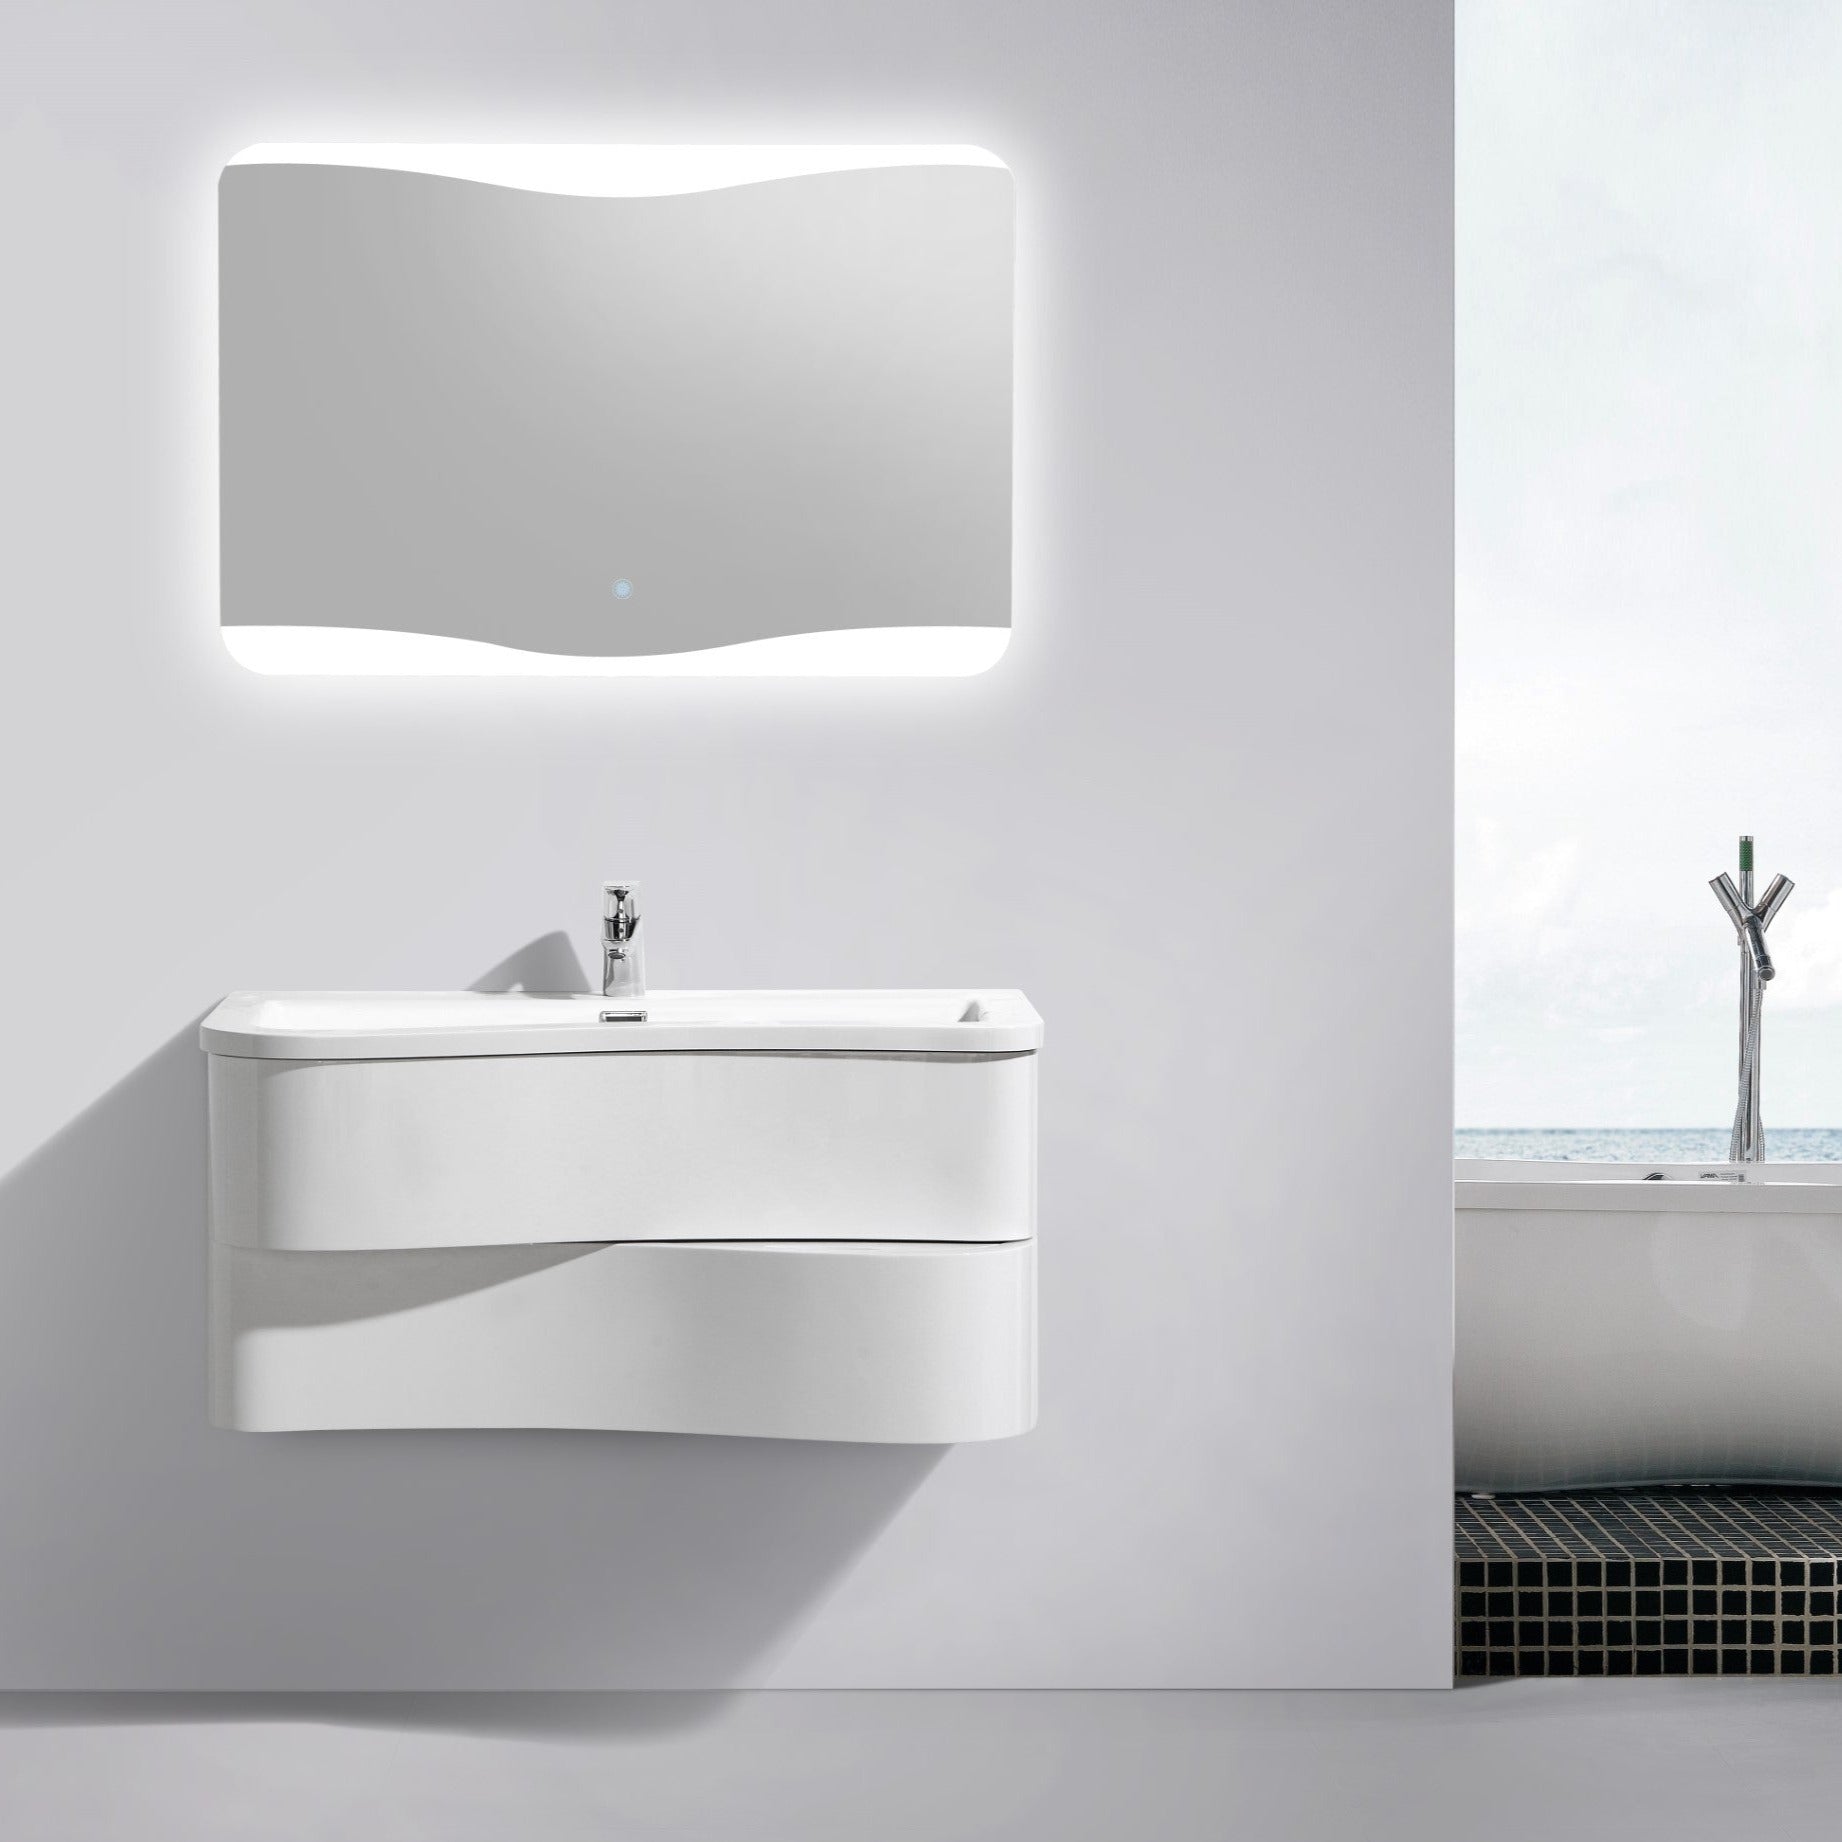 BEL BAGNO FORMICA GLOSS WHITE 900MM SINGLE BOWL WALL HUNG VANITY AND BASIN